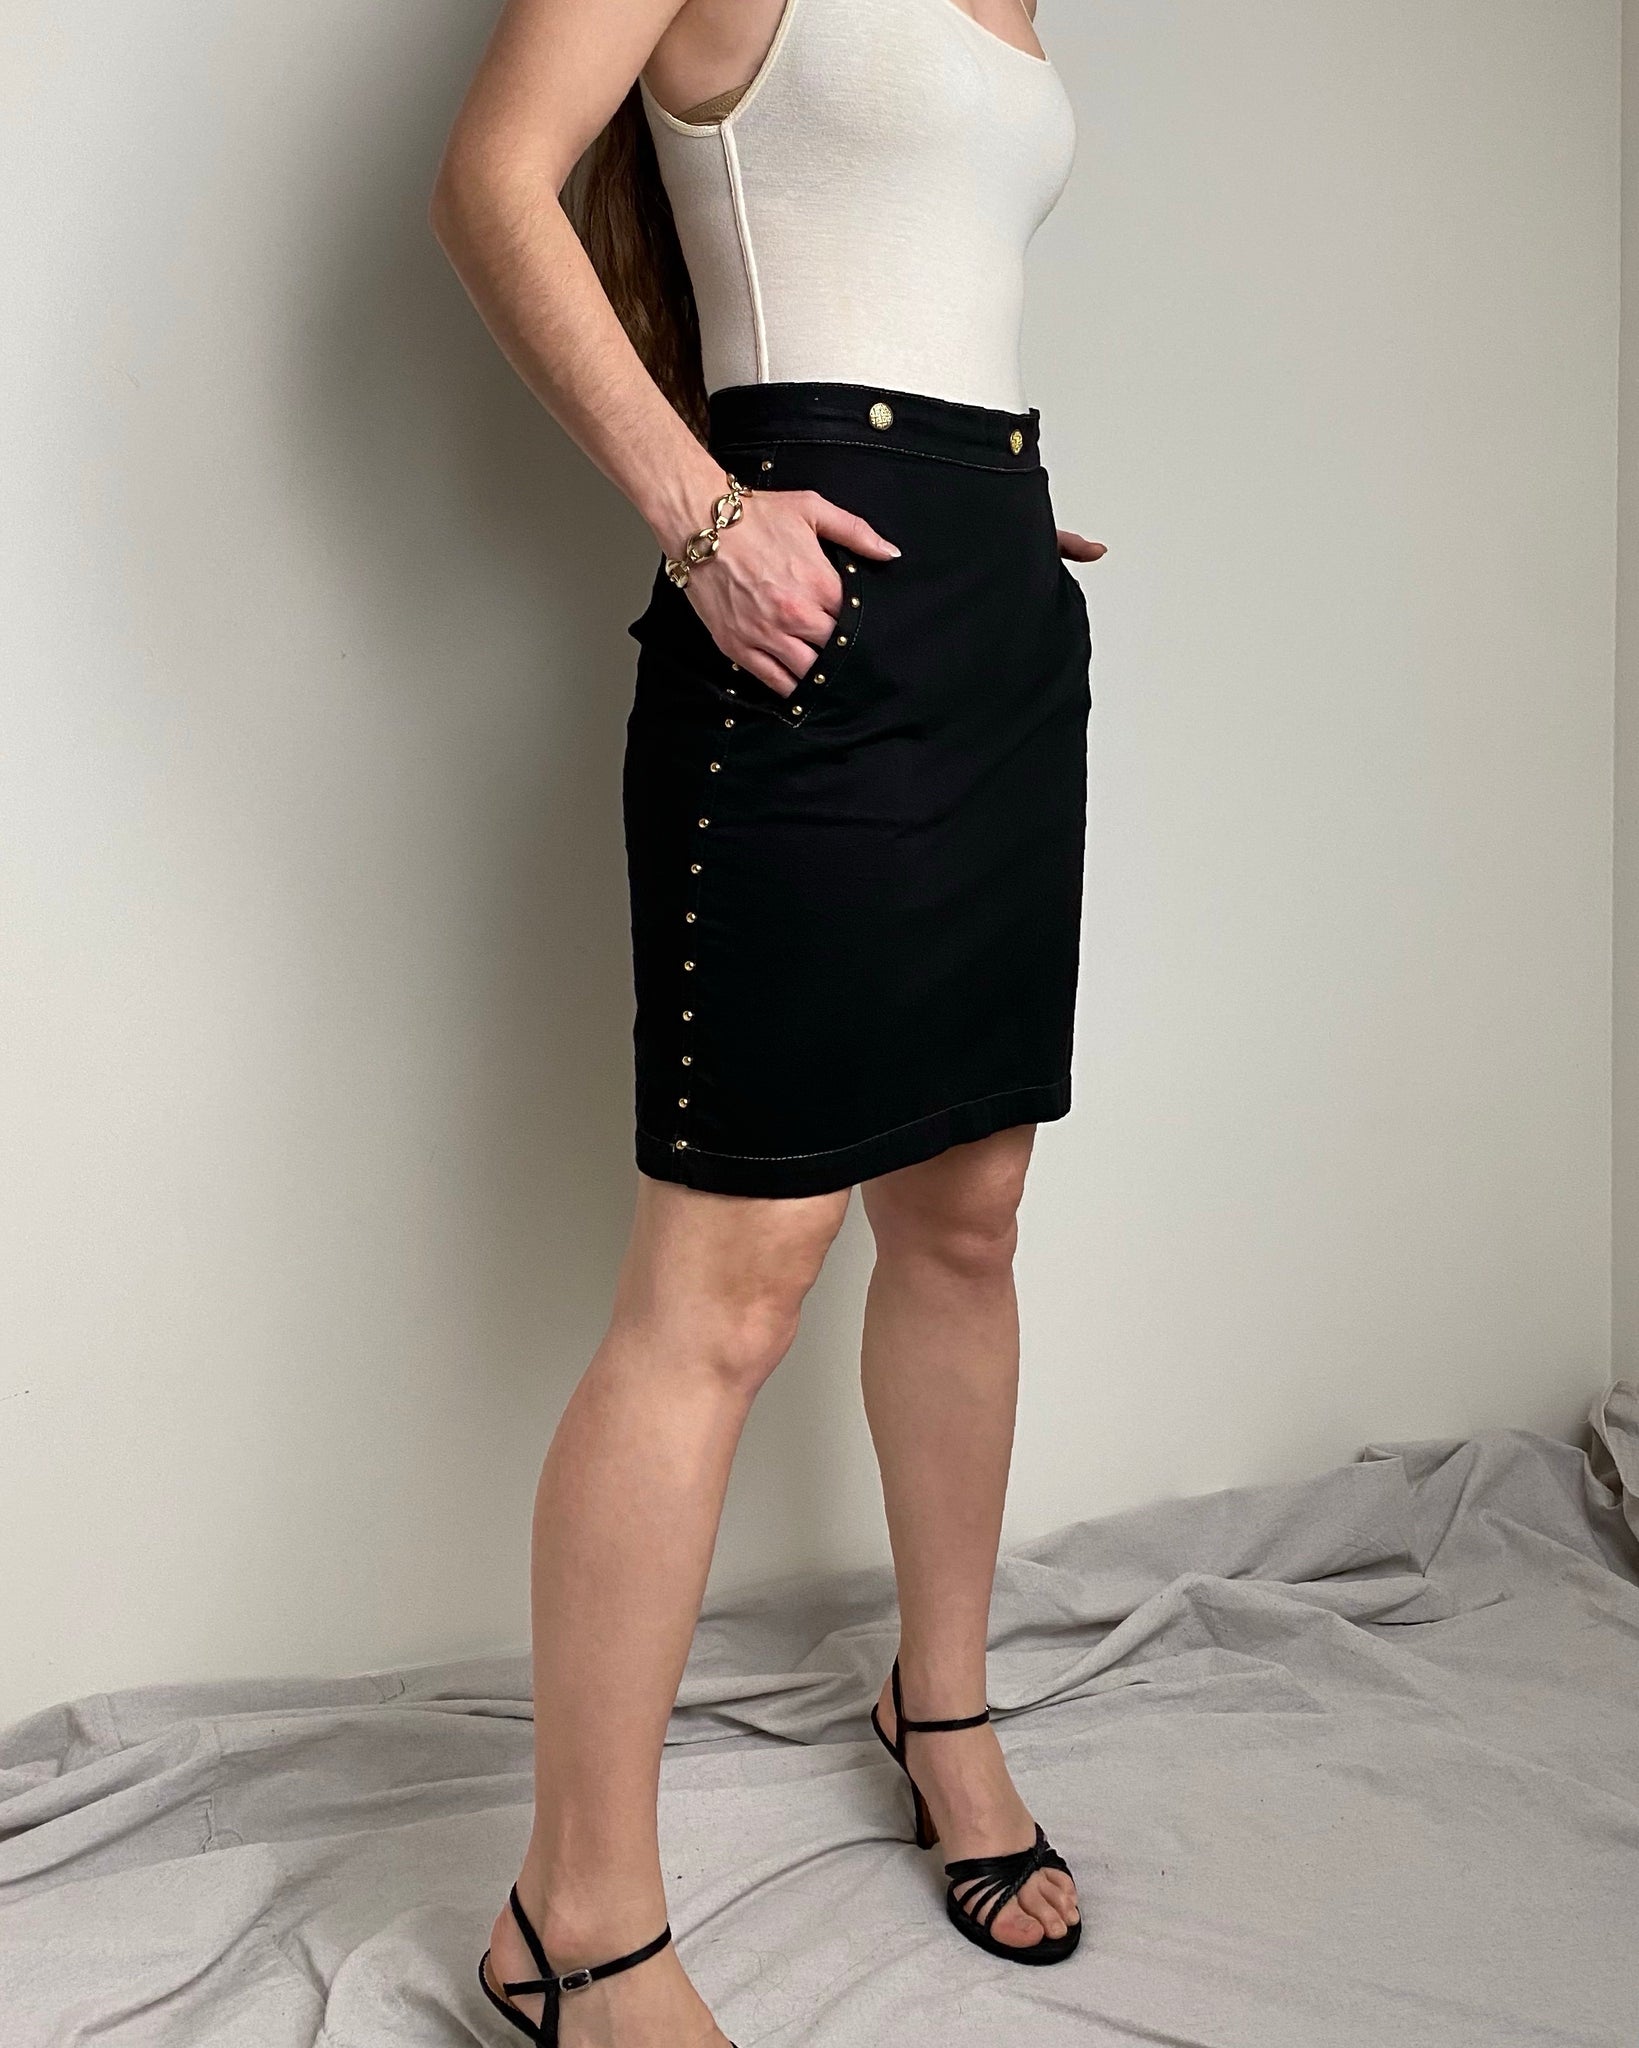 80s Black Pencil Skirt with Gold Embellishment (size 6)